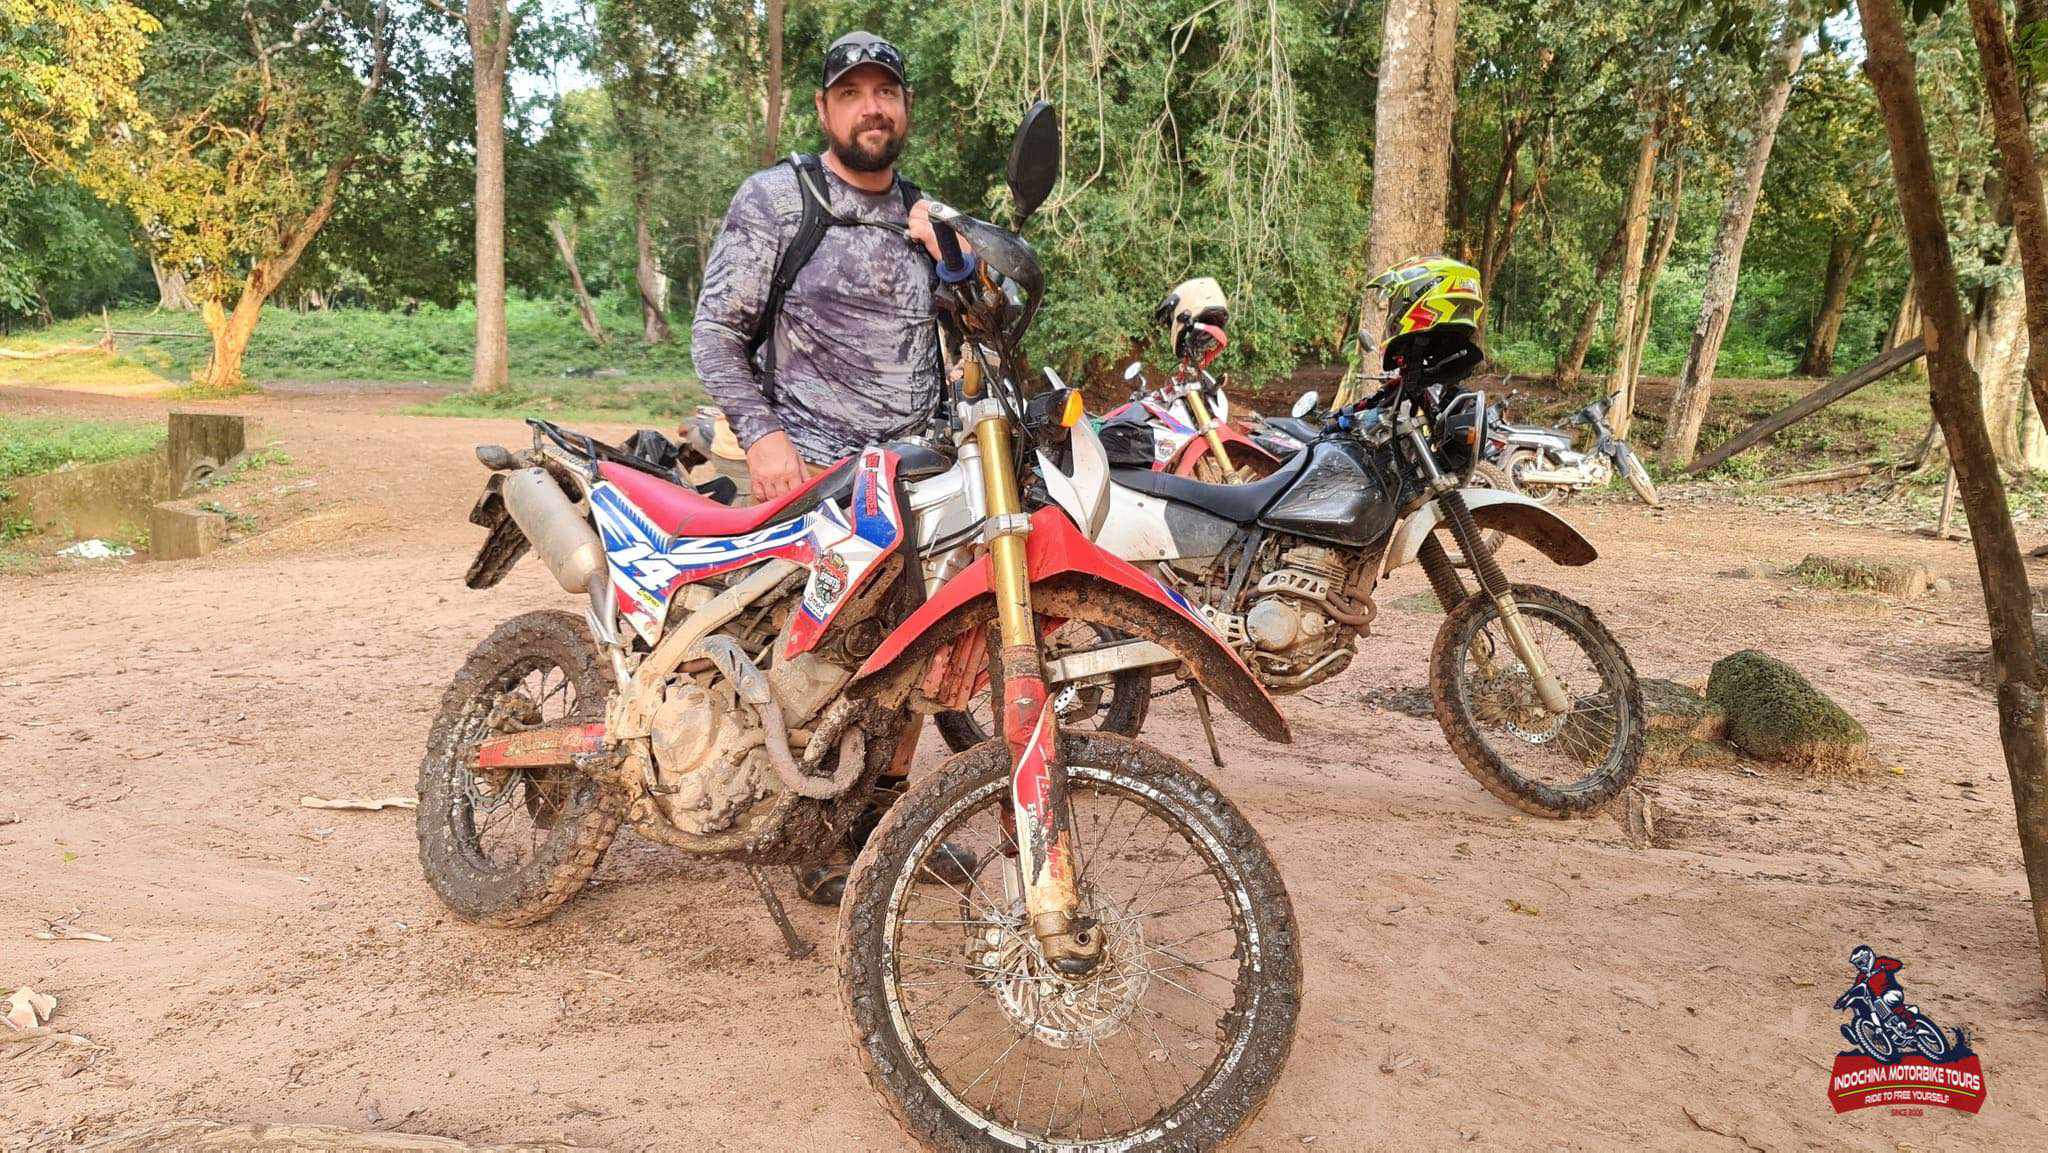 Cambodia off road motorbike tour from phnom penh to siem reap 22 - Cambodia Motorcycle Tours from Phnom Penh to Siem Reap